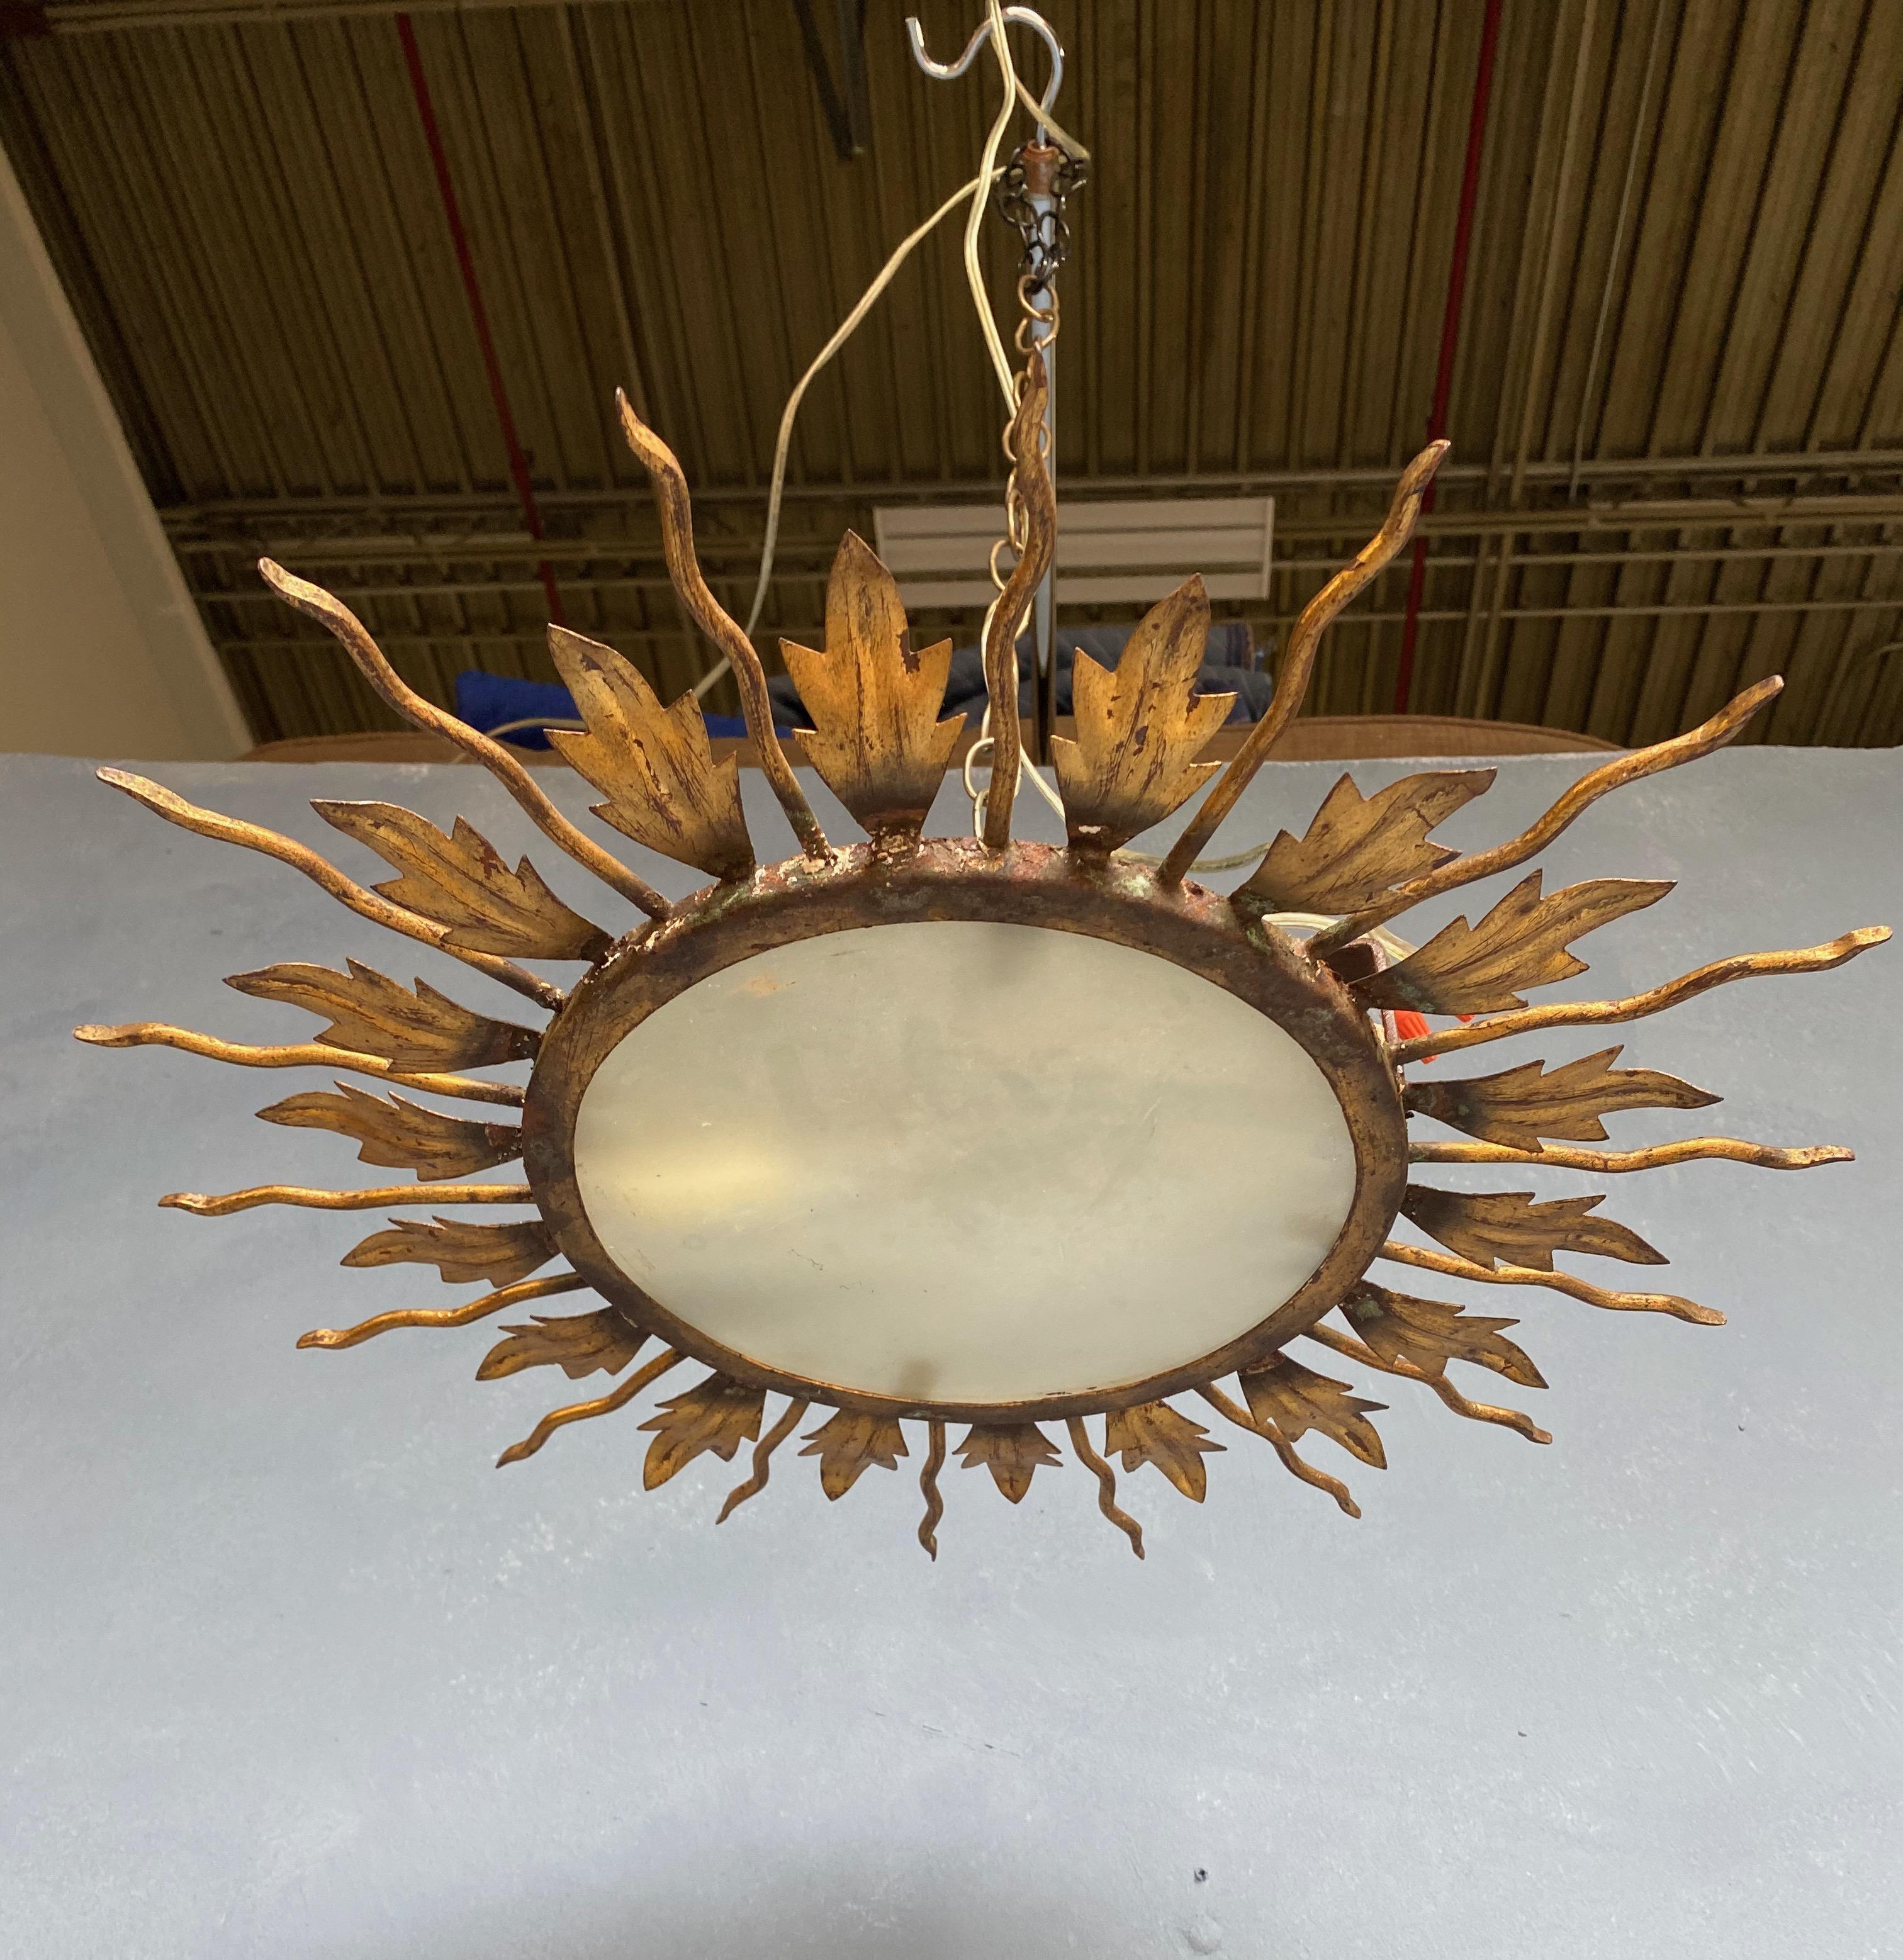  An unusual flush mounted ceiling fixture with two alternating layers of leave and rays joined together on a solid base. The hand applied finish has a rich gold patina over a darker under coat.  This fixture will be wired to accommodate 2 candelabra